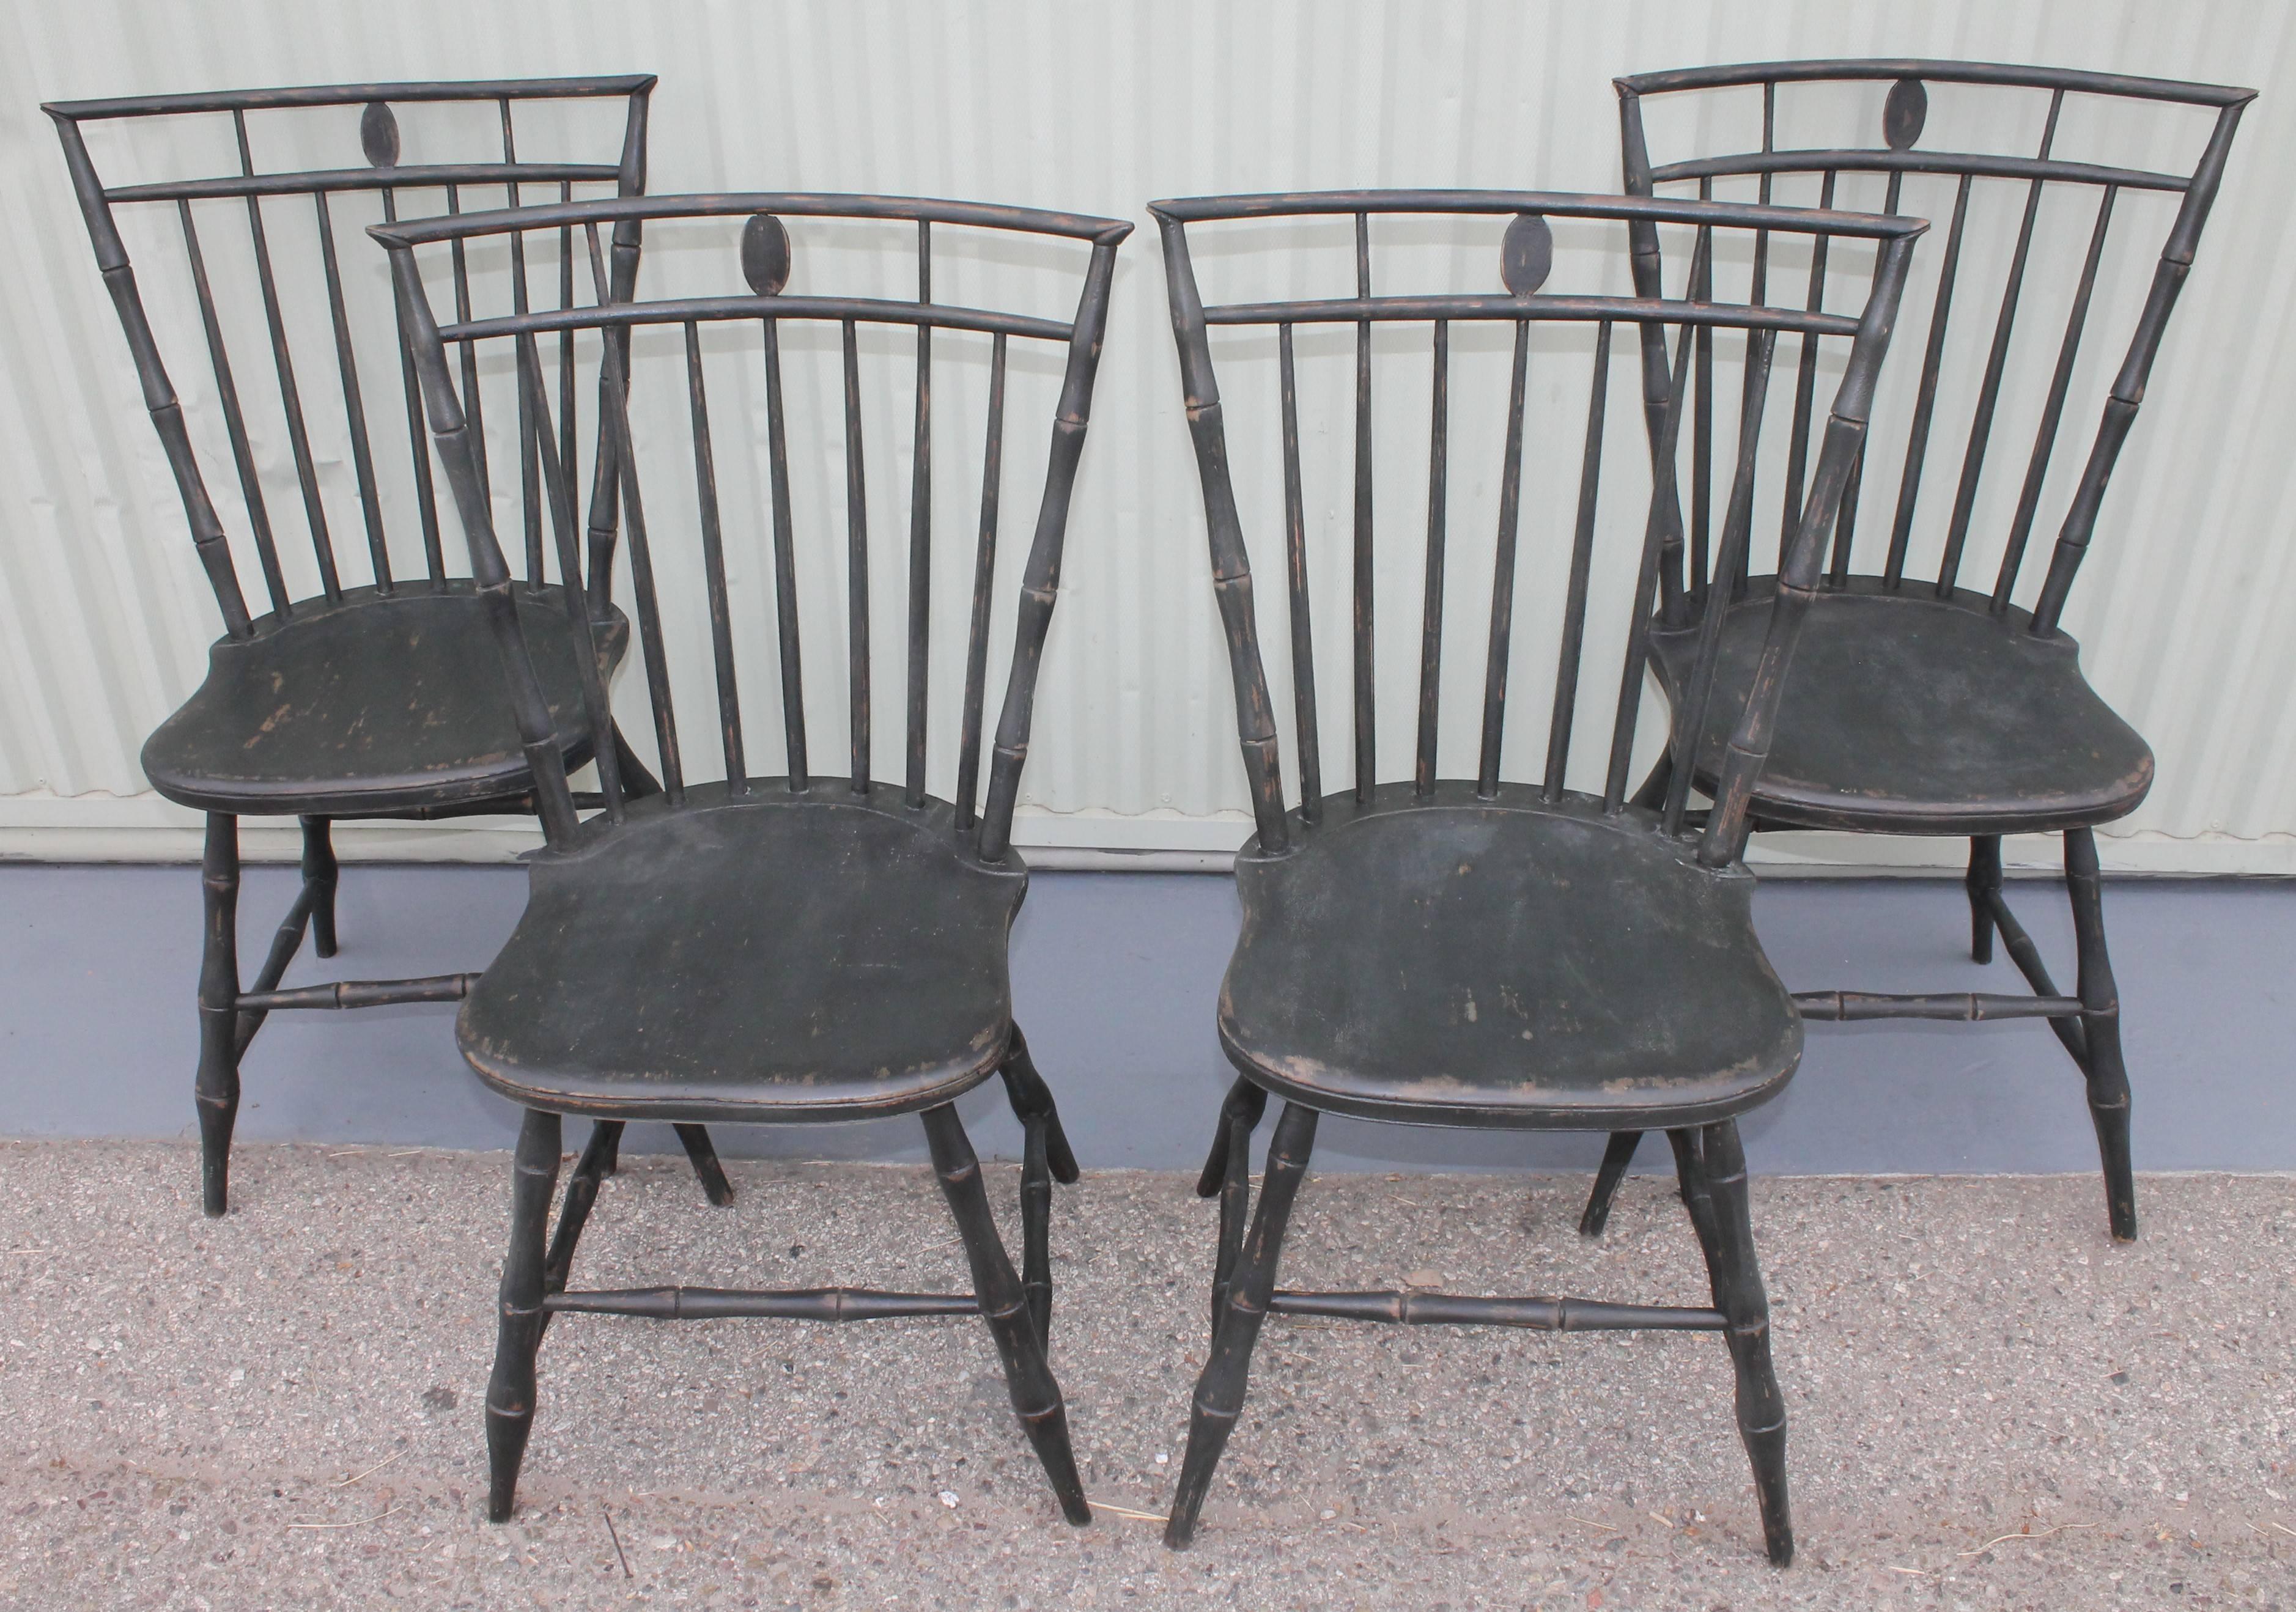 19th century green painted Windsor chairs in fine condition with wear consistent from age and use. This set of four matching chairs are very strong and sturdy. They are super comfortable and great looking. This is a second generation painted